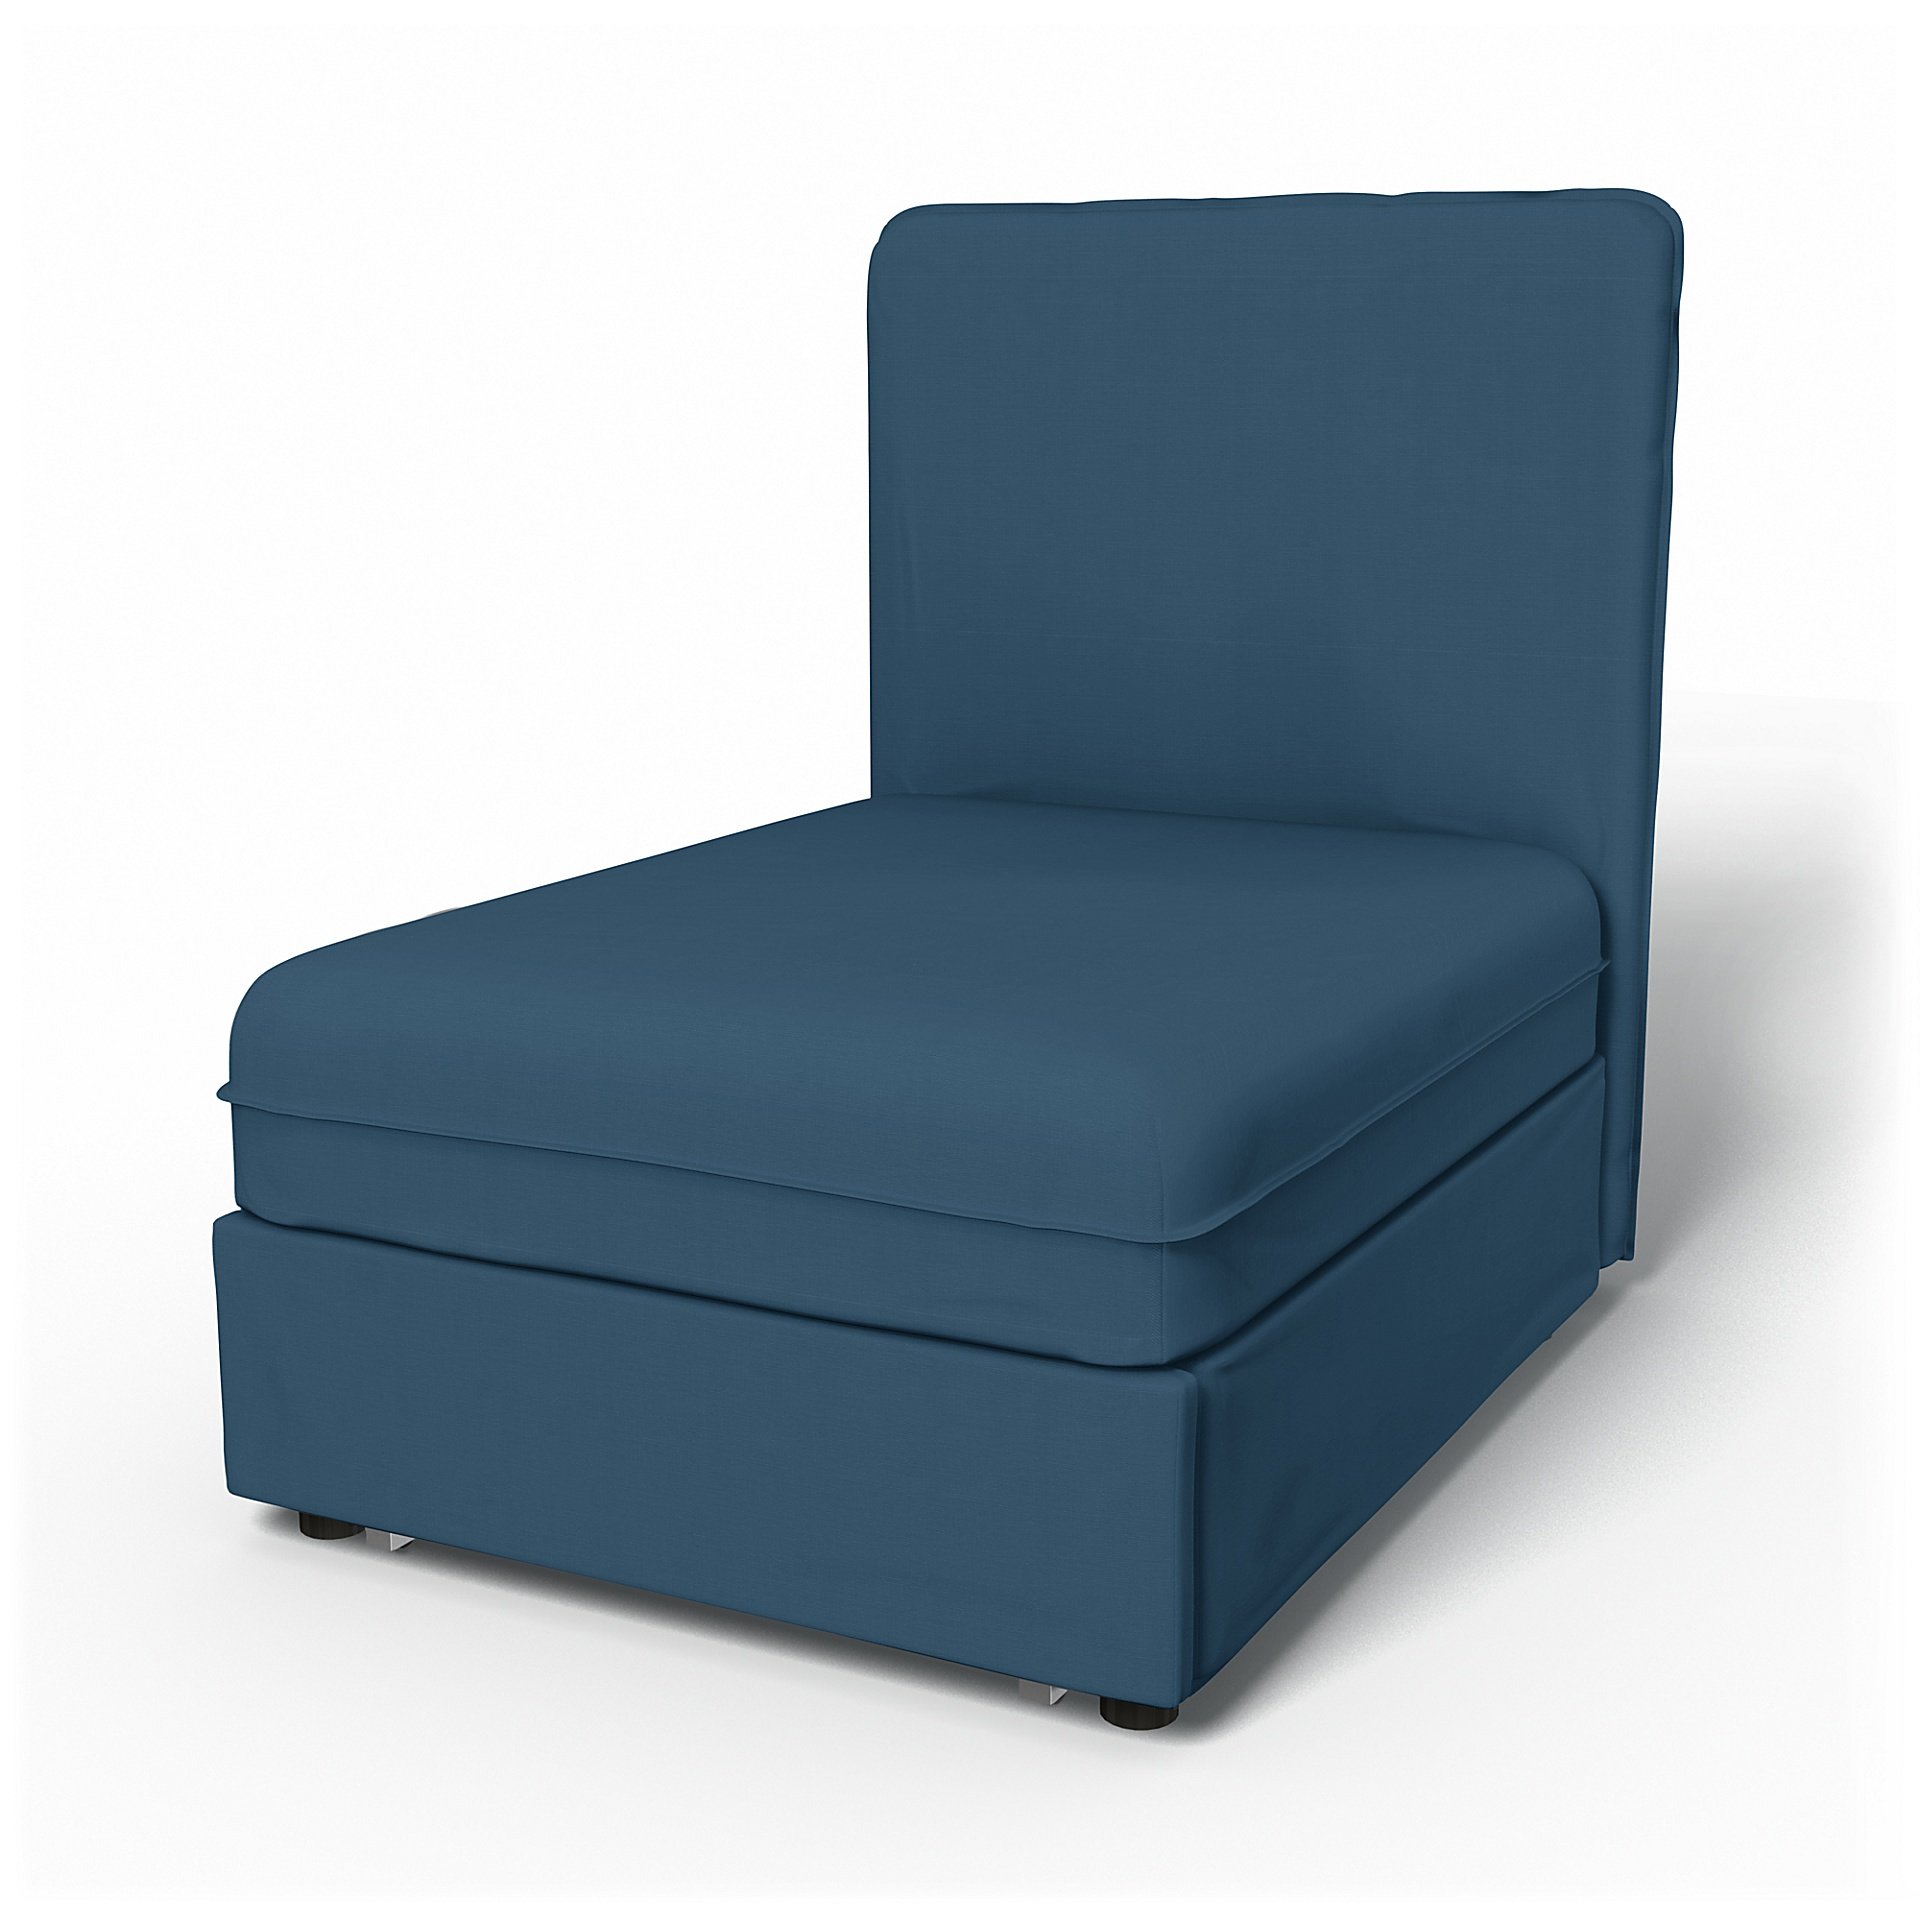 IKEA - Vallentuna Seat Module with High Back Sofa Bed Cover (80x100x46cm), Real Teal, Cotton - Bemz